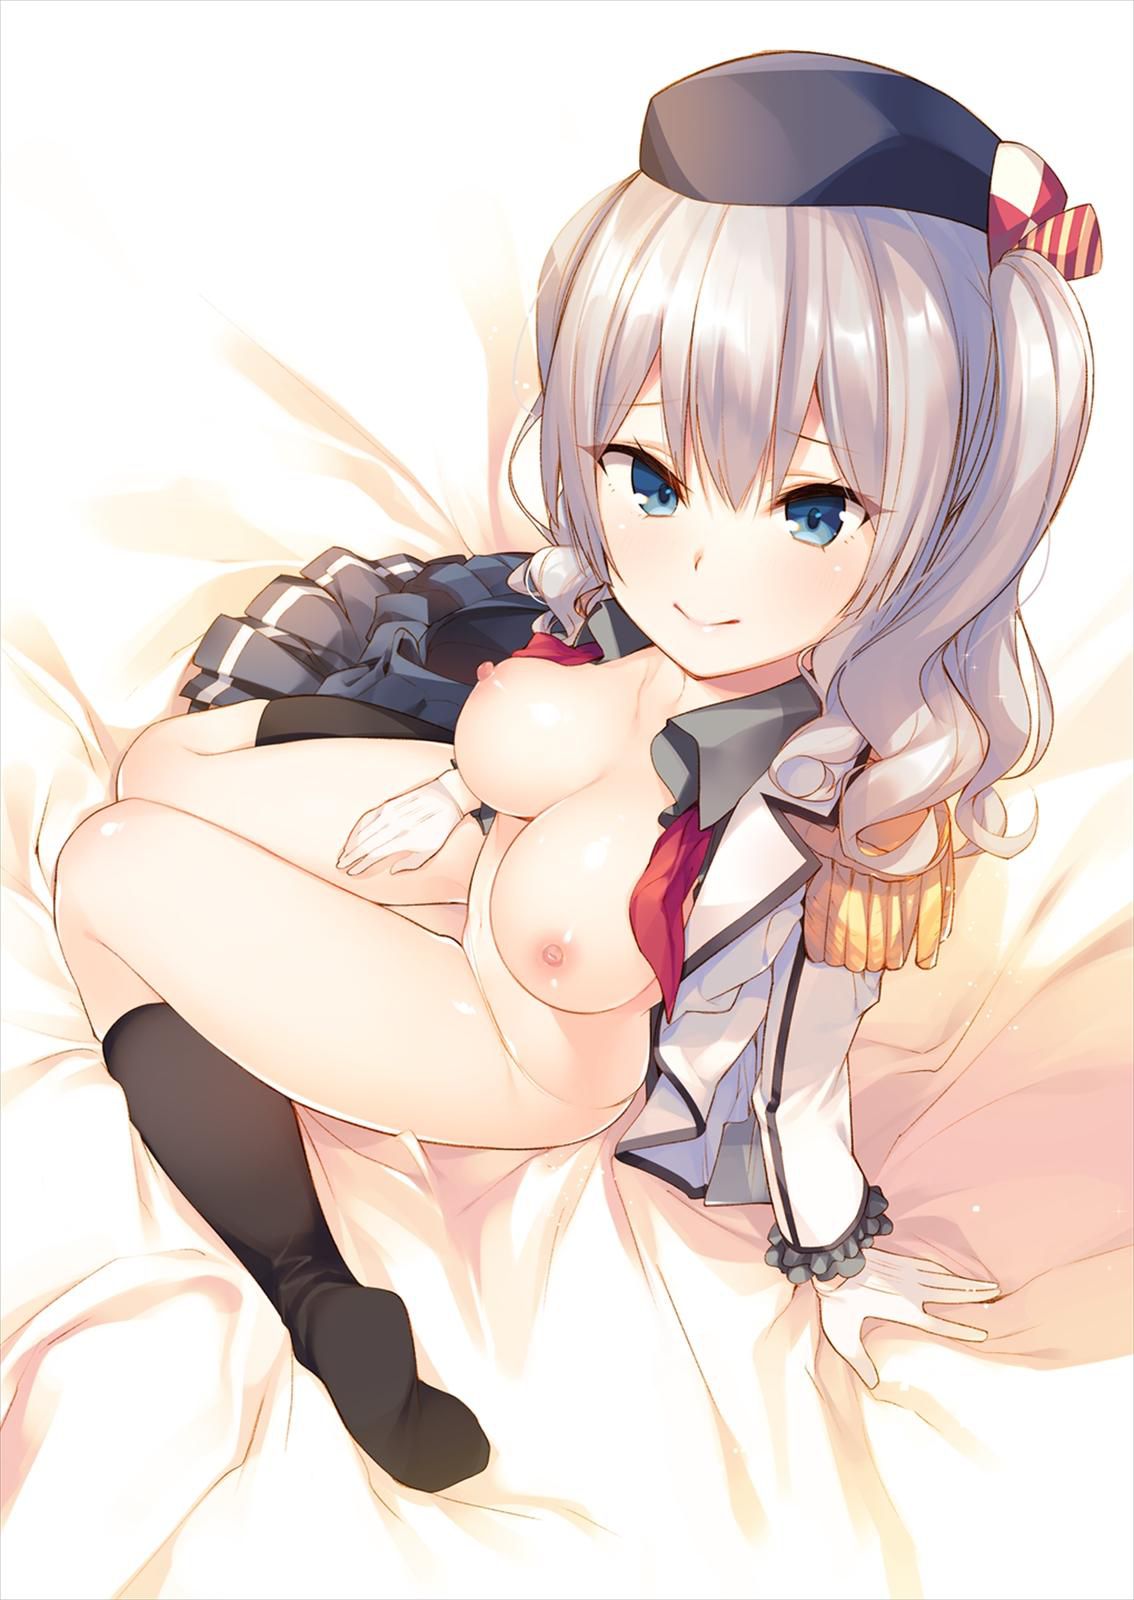 2-d "battle with HMS girls and morning! ♡ ♡ ♡ ' fleet abcdcollectionsabcdviewing erotic pictures 50 sheets (12/28) 40